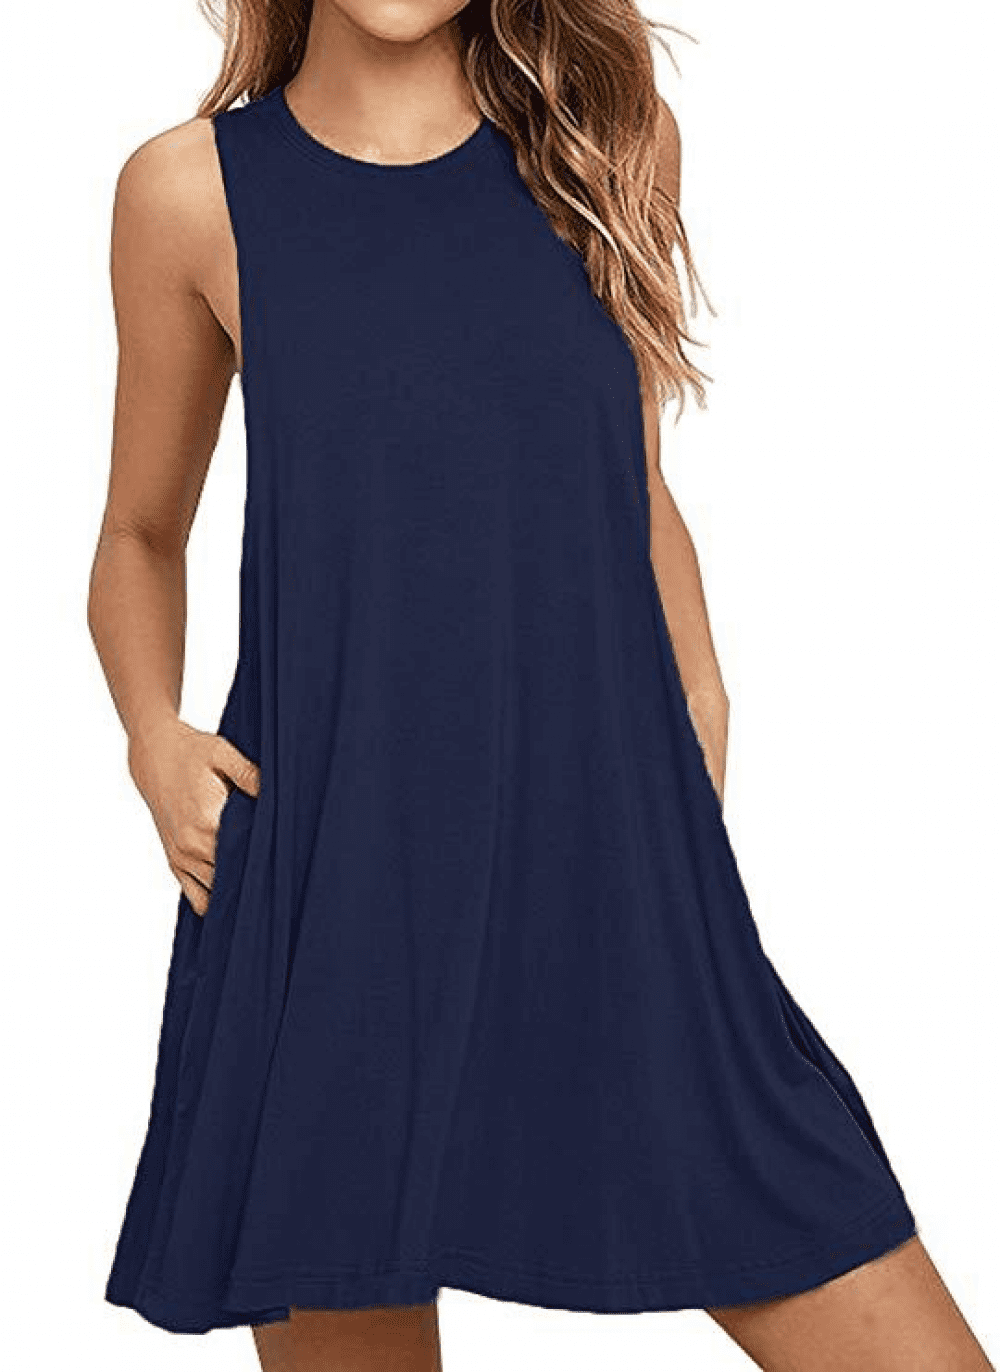 Glamorous Plus Size Dress for Women O-Neck Solid Color Summer Dress ...